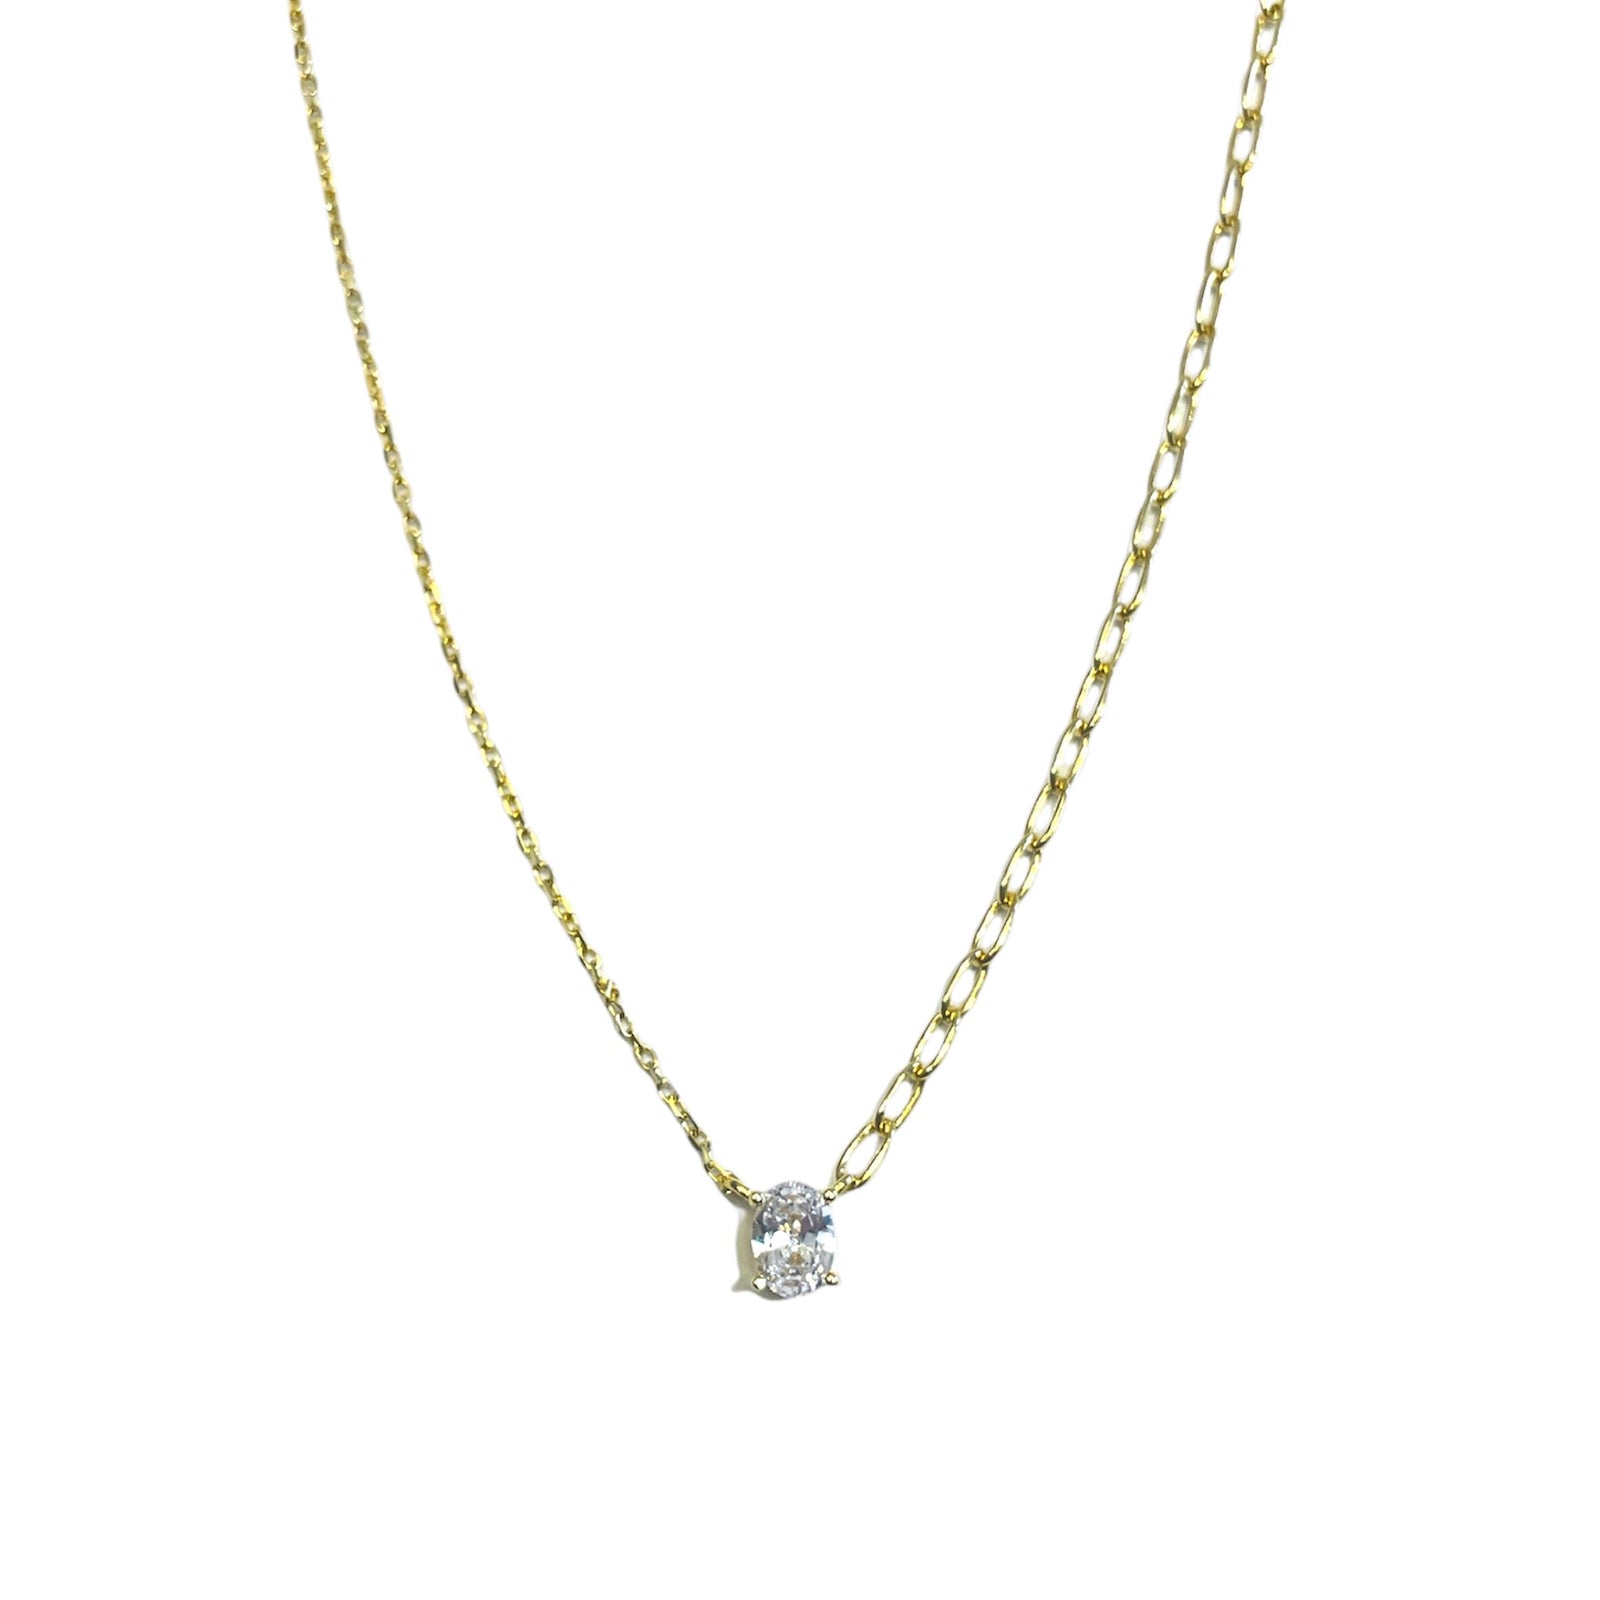 Cz Mixed chain necklace